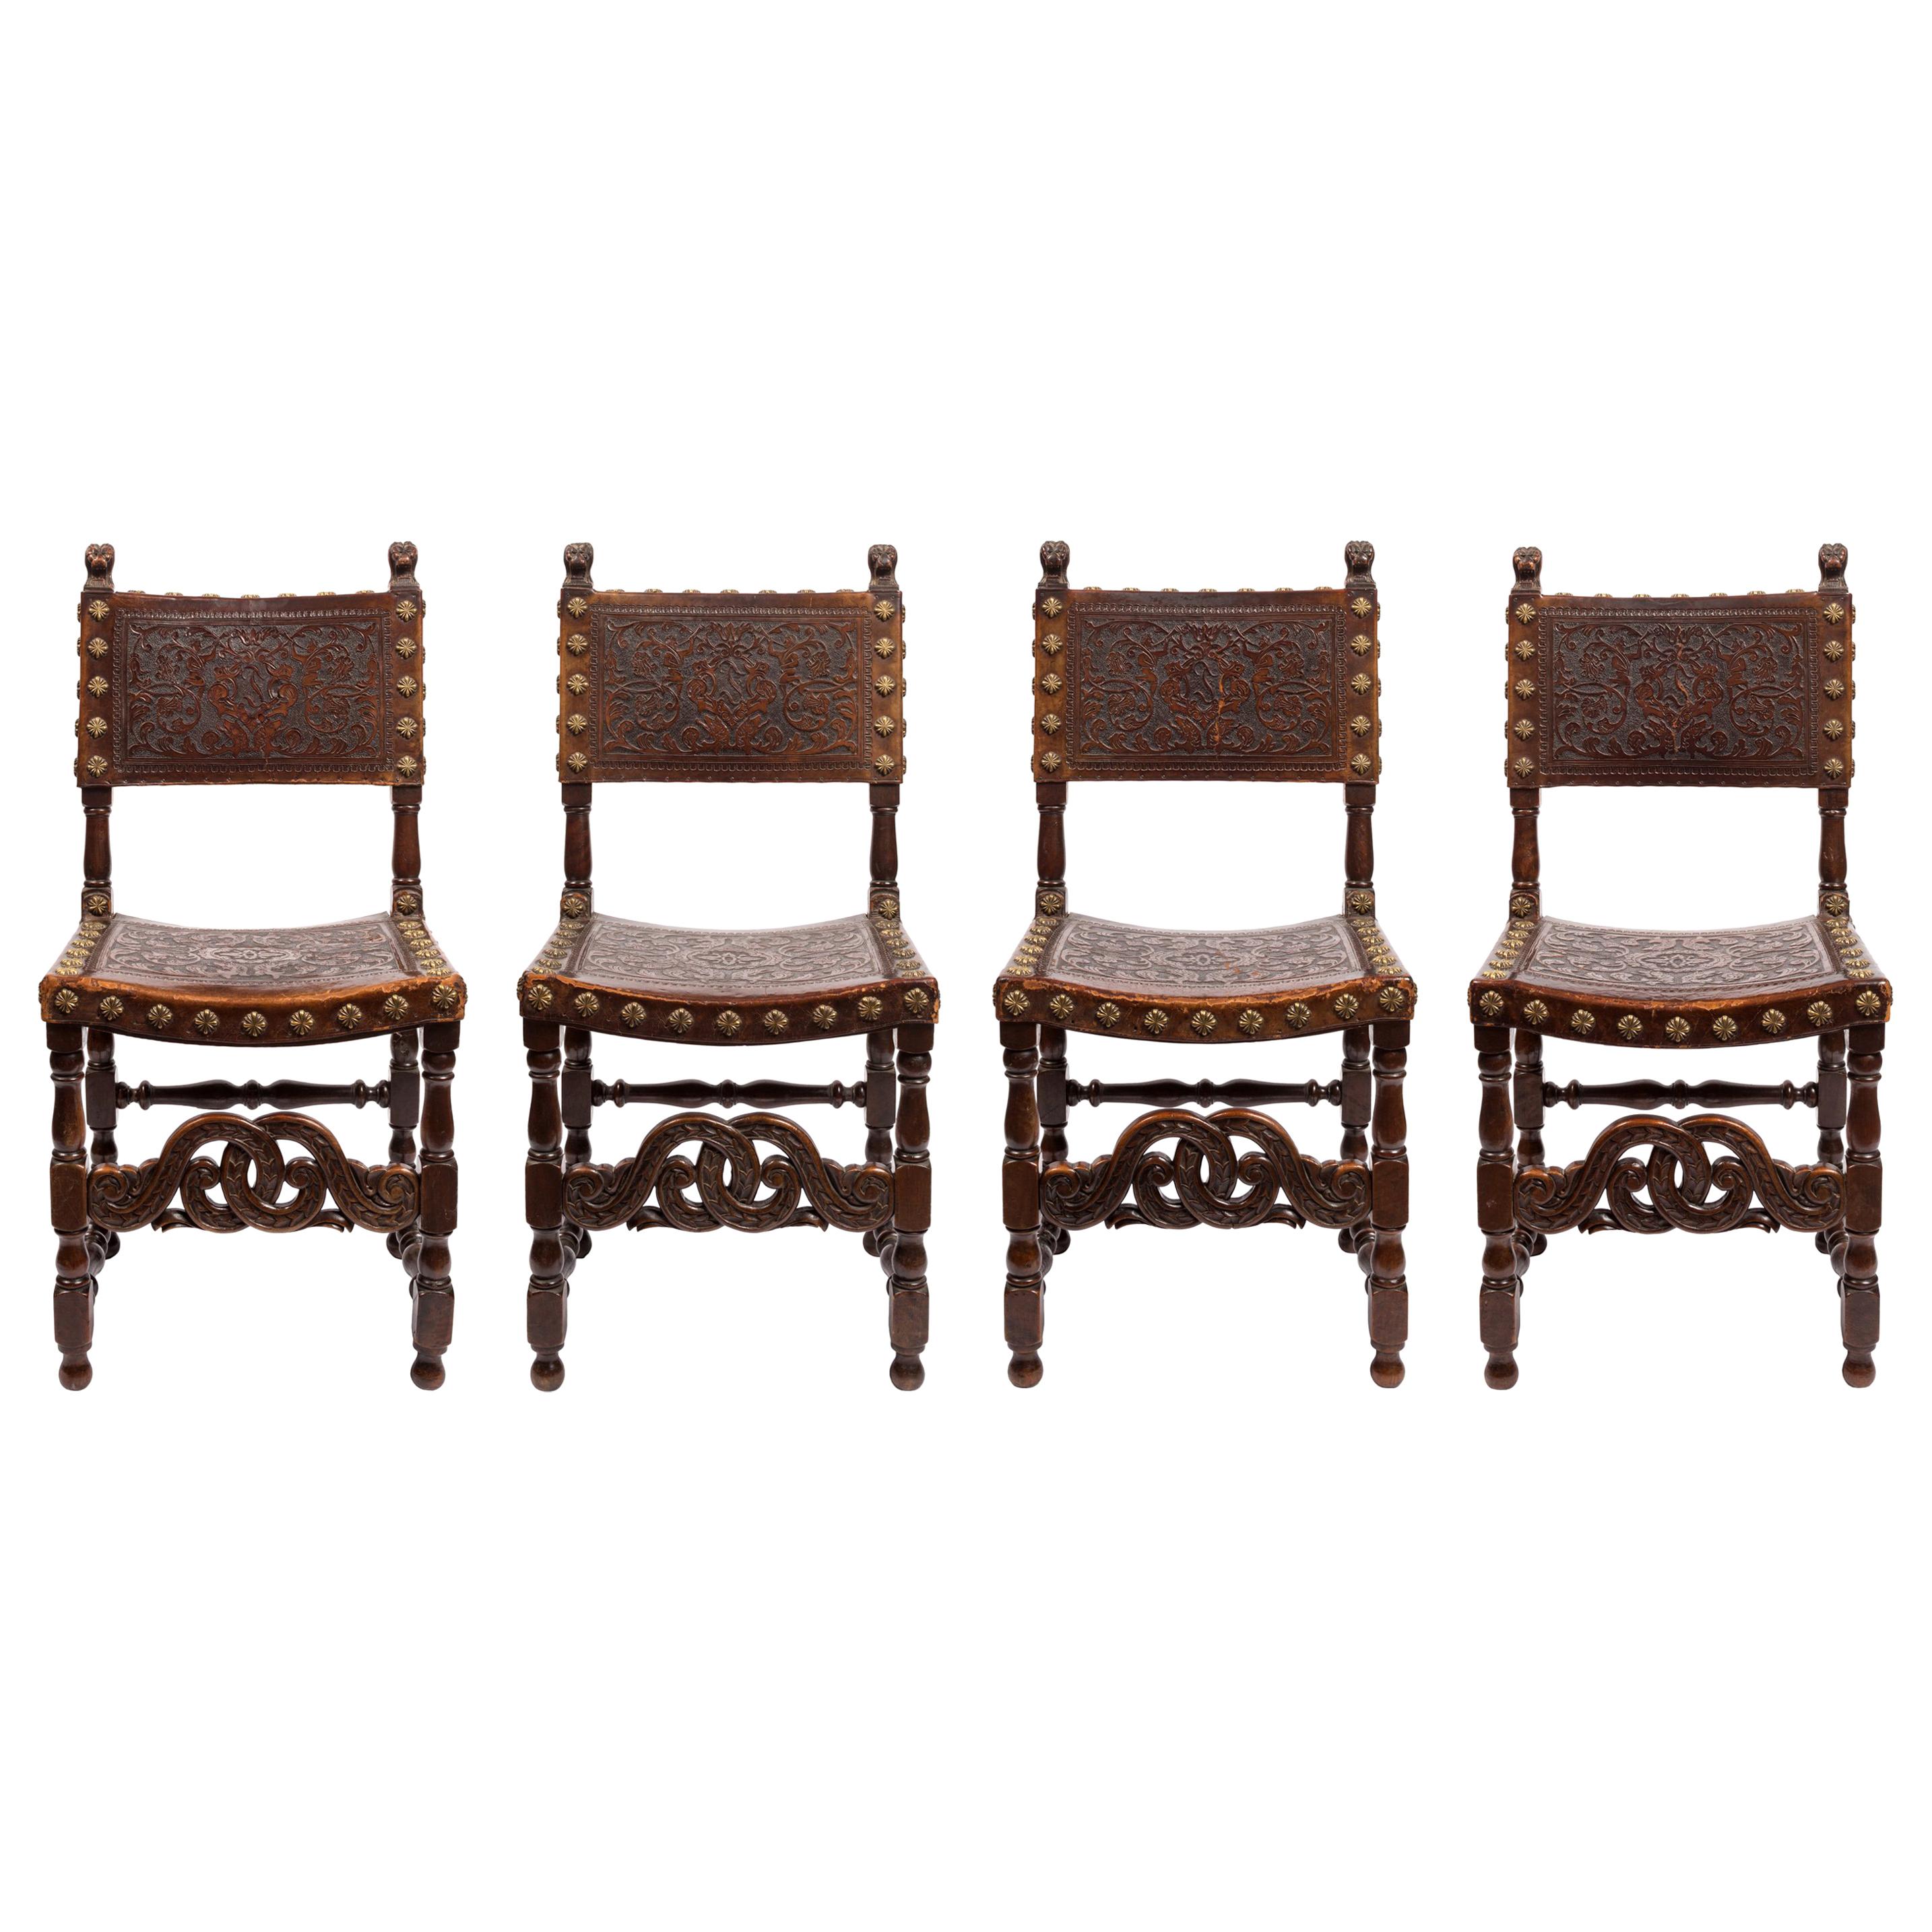 Set of Four 18th Century Spanish Embossed Leather Chairs